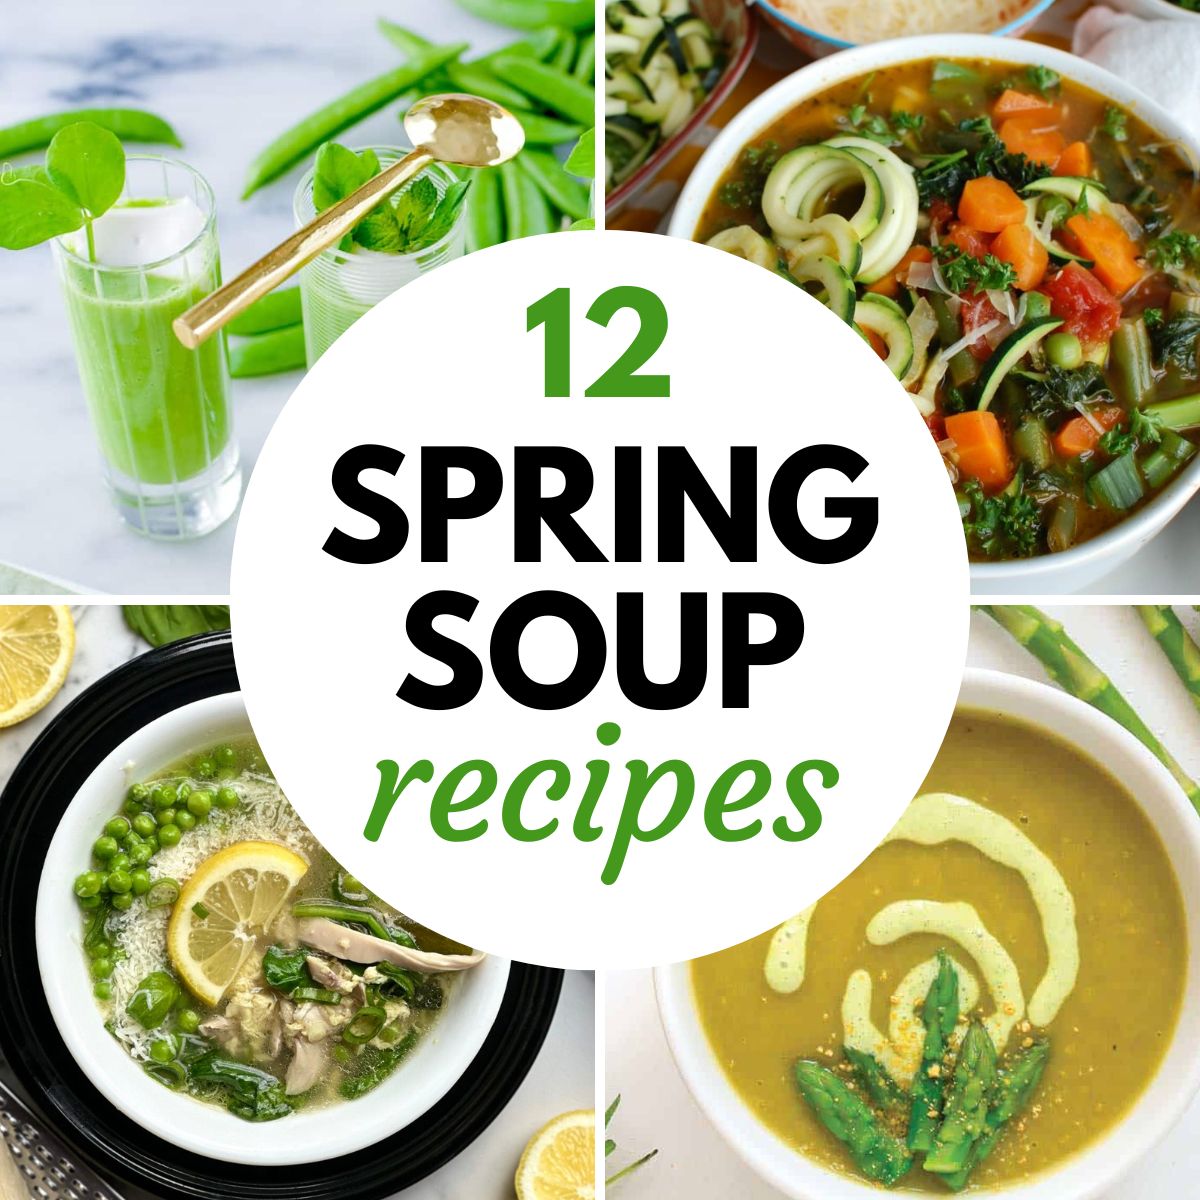 Image graphic with text that reads "12 Spring Soup Recipes" and an image collage with four spring soups.